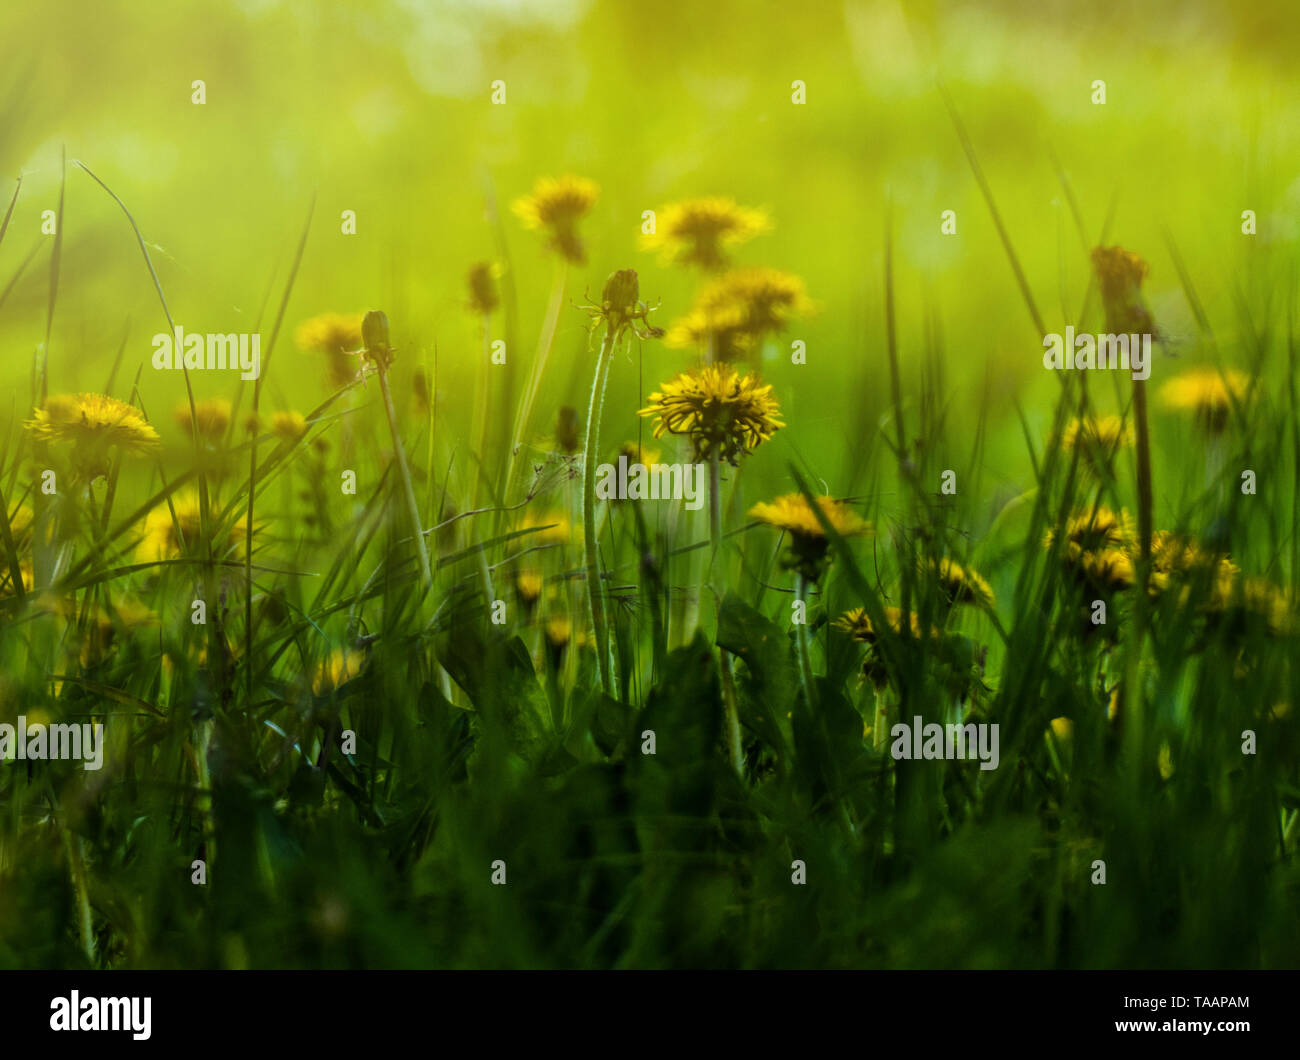 Dandelions are blooming in the yellow rays of the spring sun Stock Photo